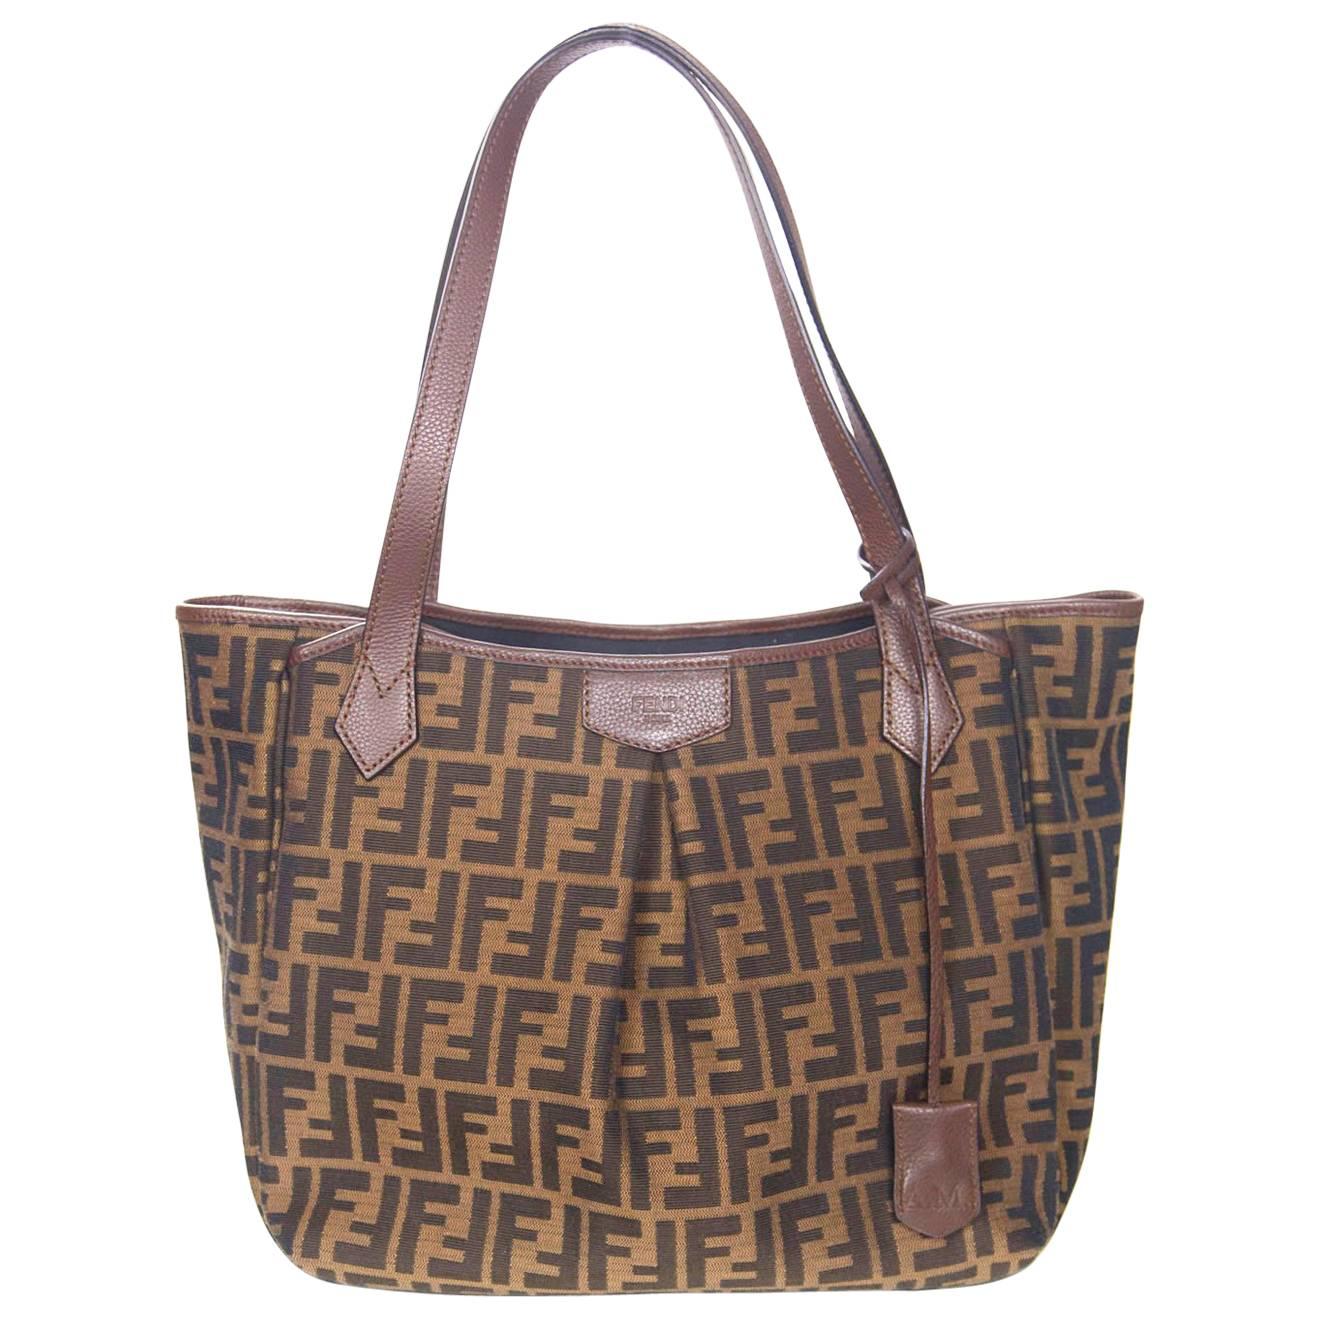 Fendi Canvas Zucca Print Tote Bag With Clochette And Dust Bag